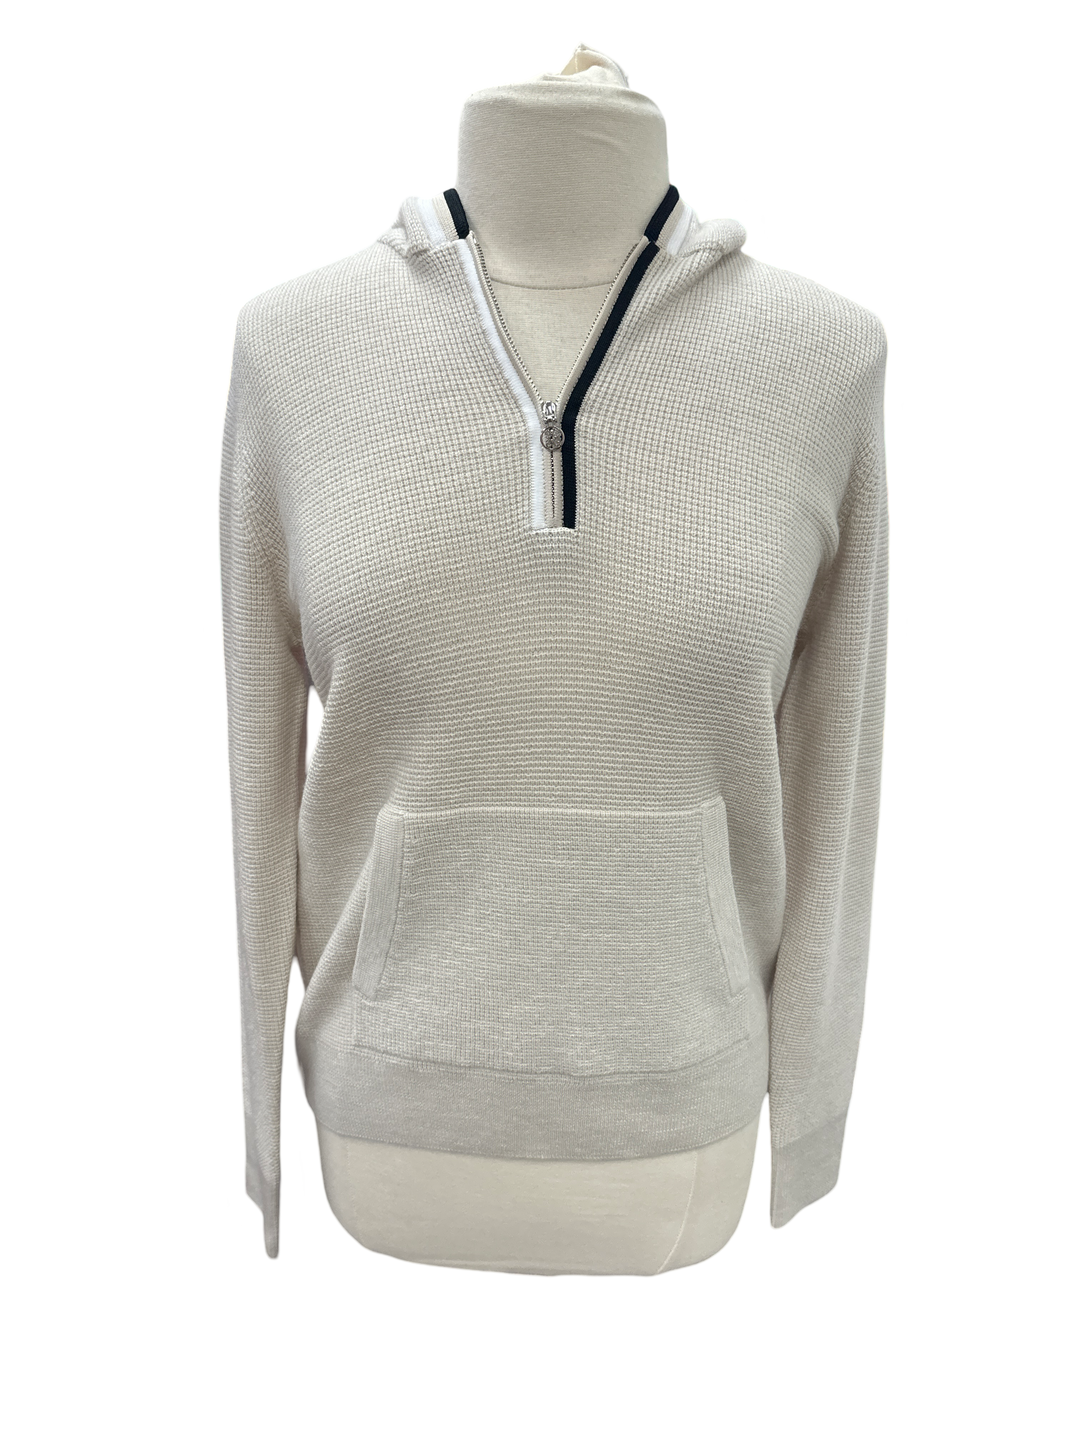 G/FORE Tan Waffle Stitch Hooded Sweater- Small - Skorzie